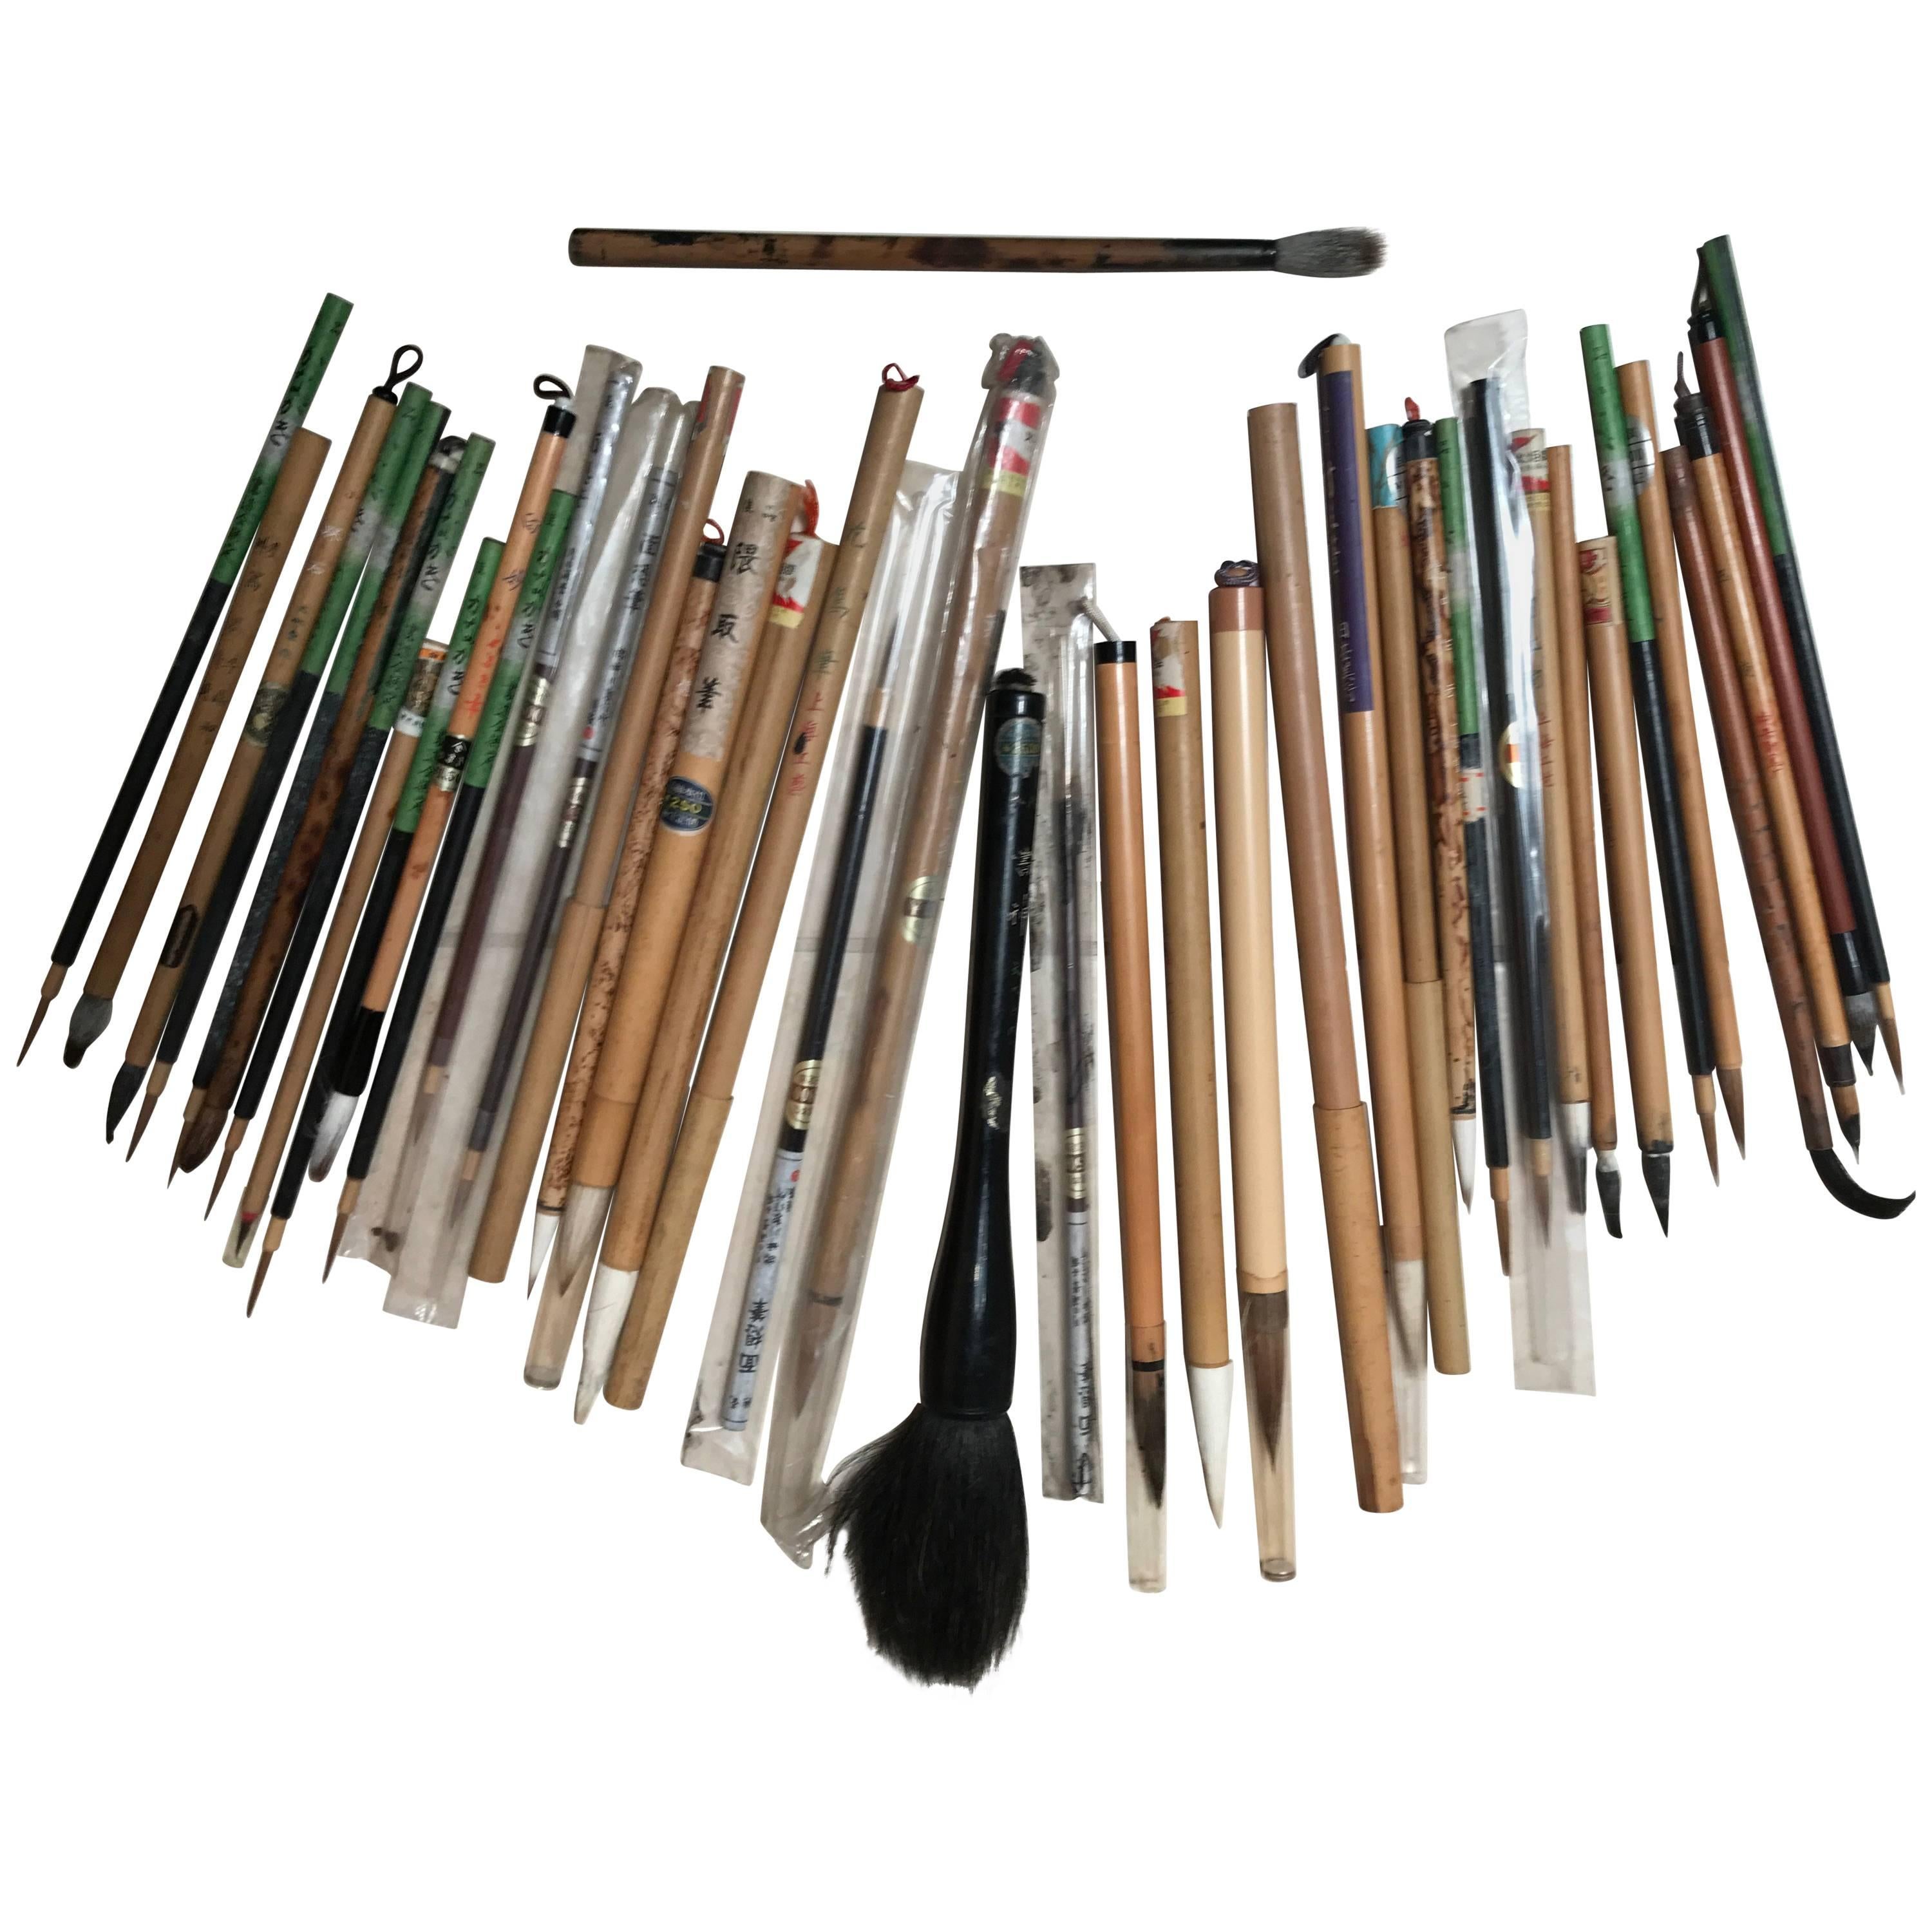 Artisan's Cache of 41 Old China Paint Calligraphy Bamboo Brushes